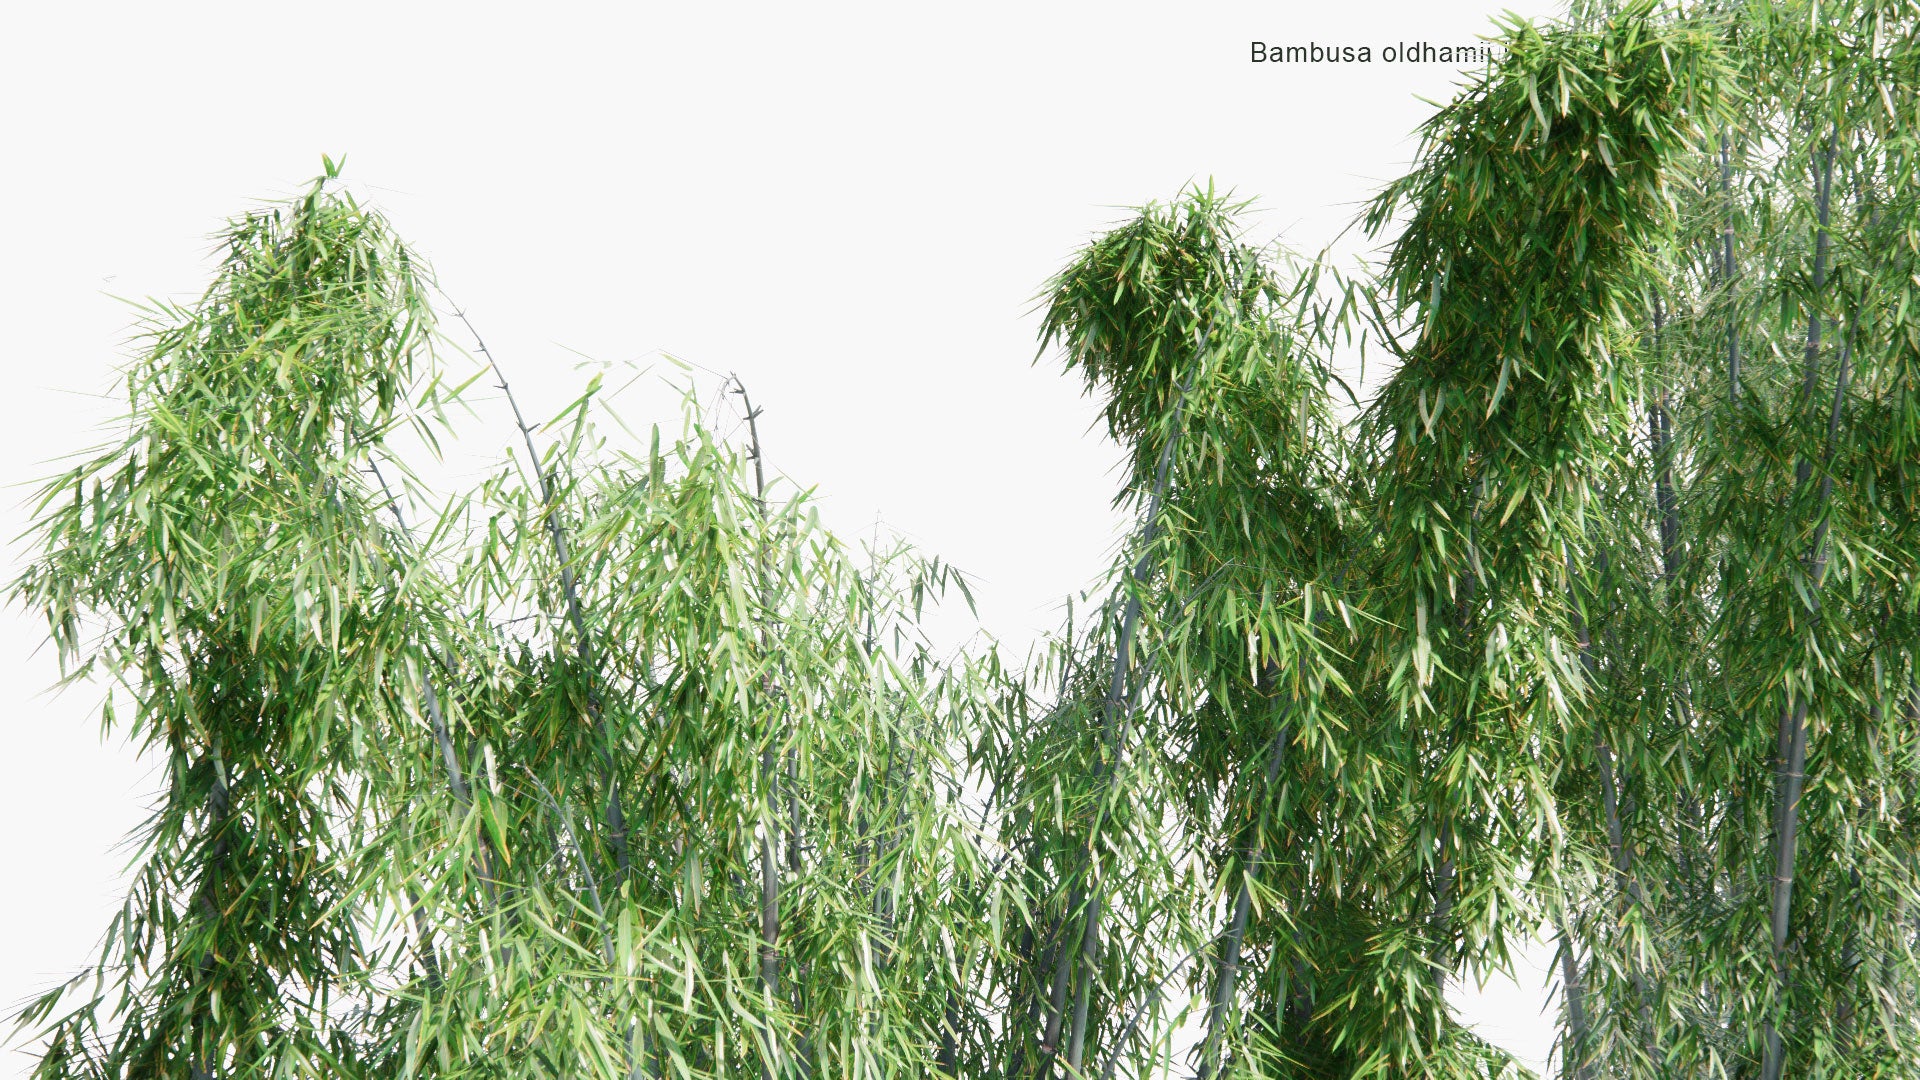 Low Poly Bambusa Oldhamii - Giant Timber Bamboo, Oldham's Bamboo (3D Model)